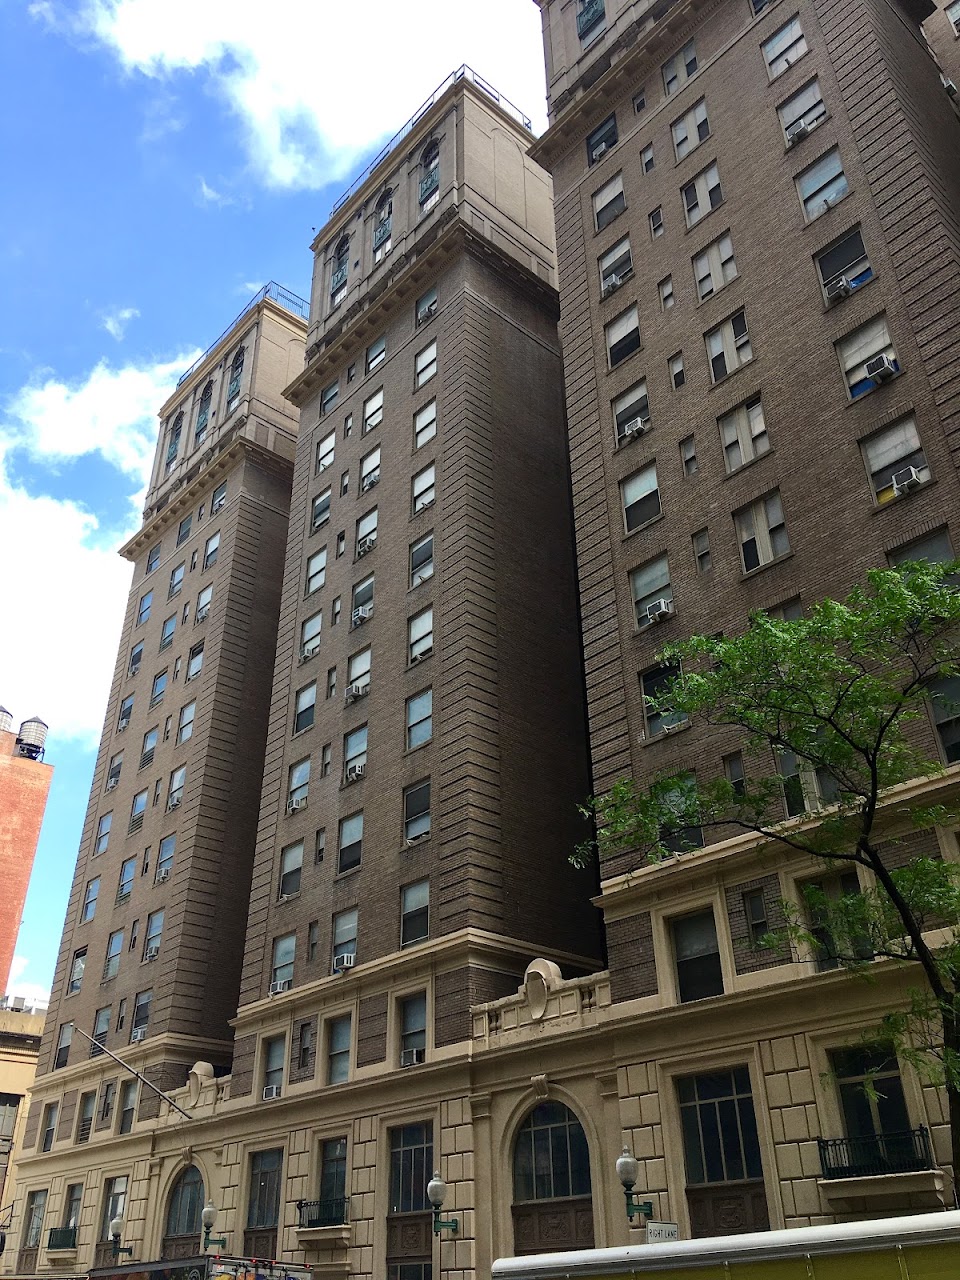 Photo of TIMES SQUARE HOTEL. Affordable housing located at 253 W 43RD ST NEW YORK, NY 10036